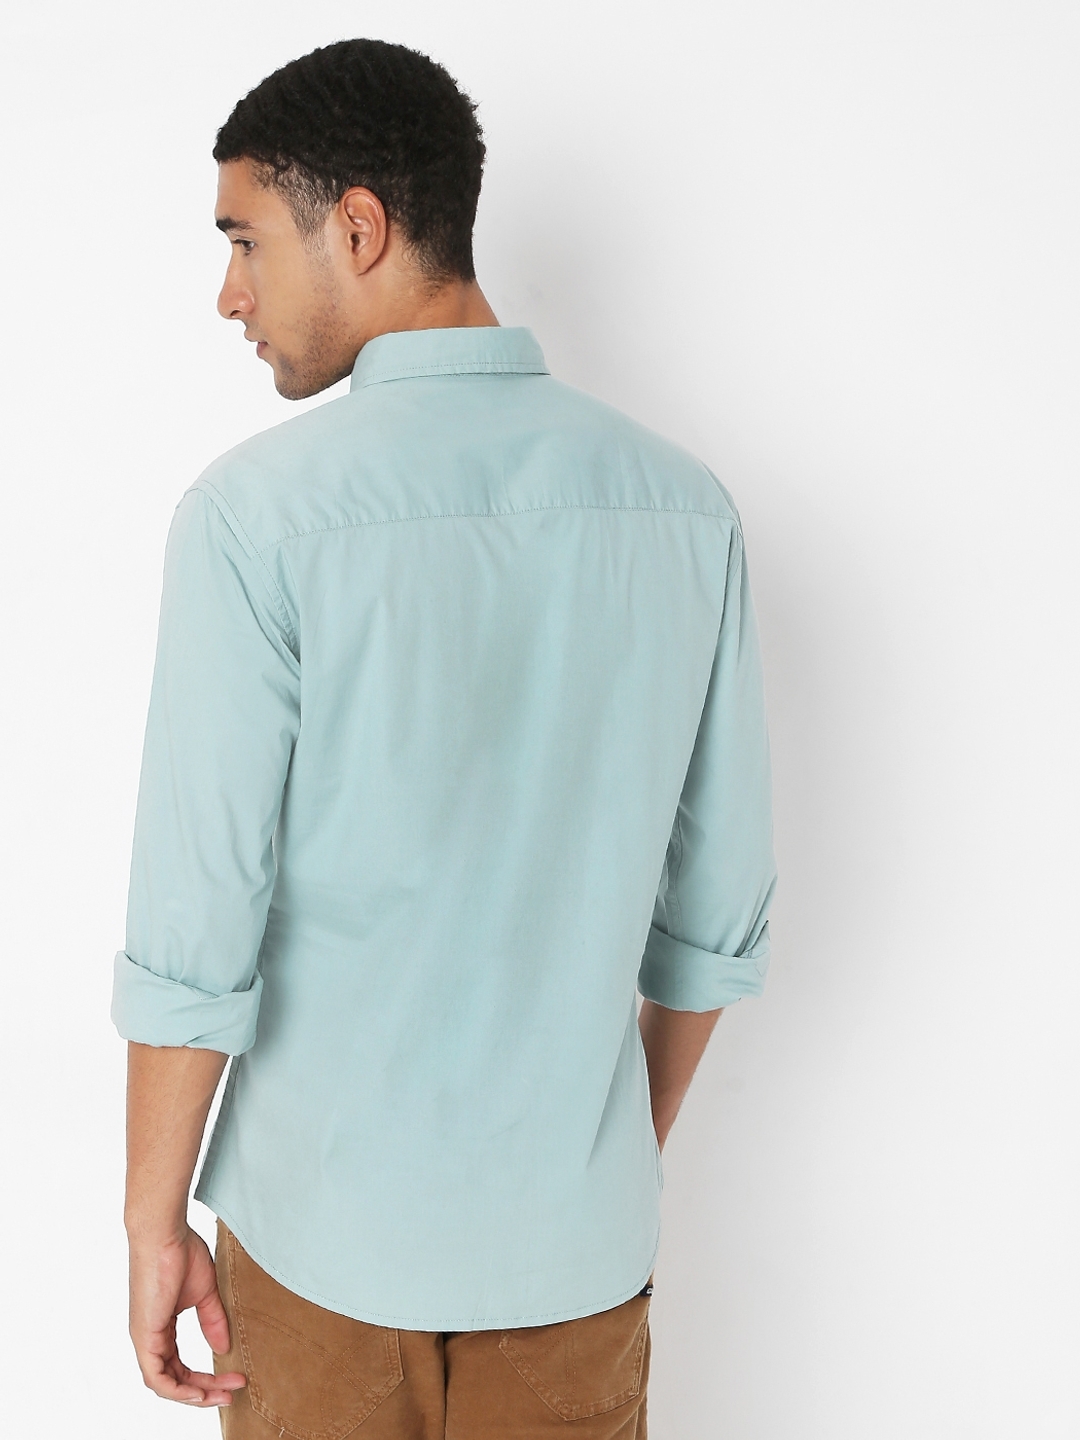 Men's ANDREW NEU IN Relaxed Fit Shirt